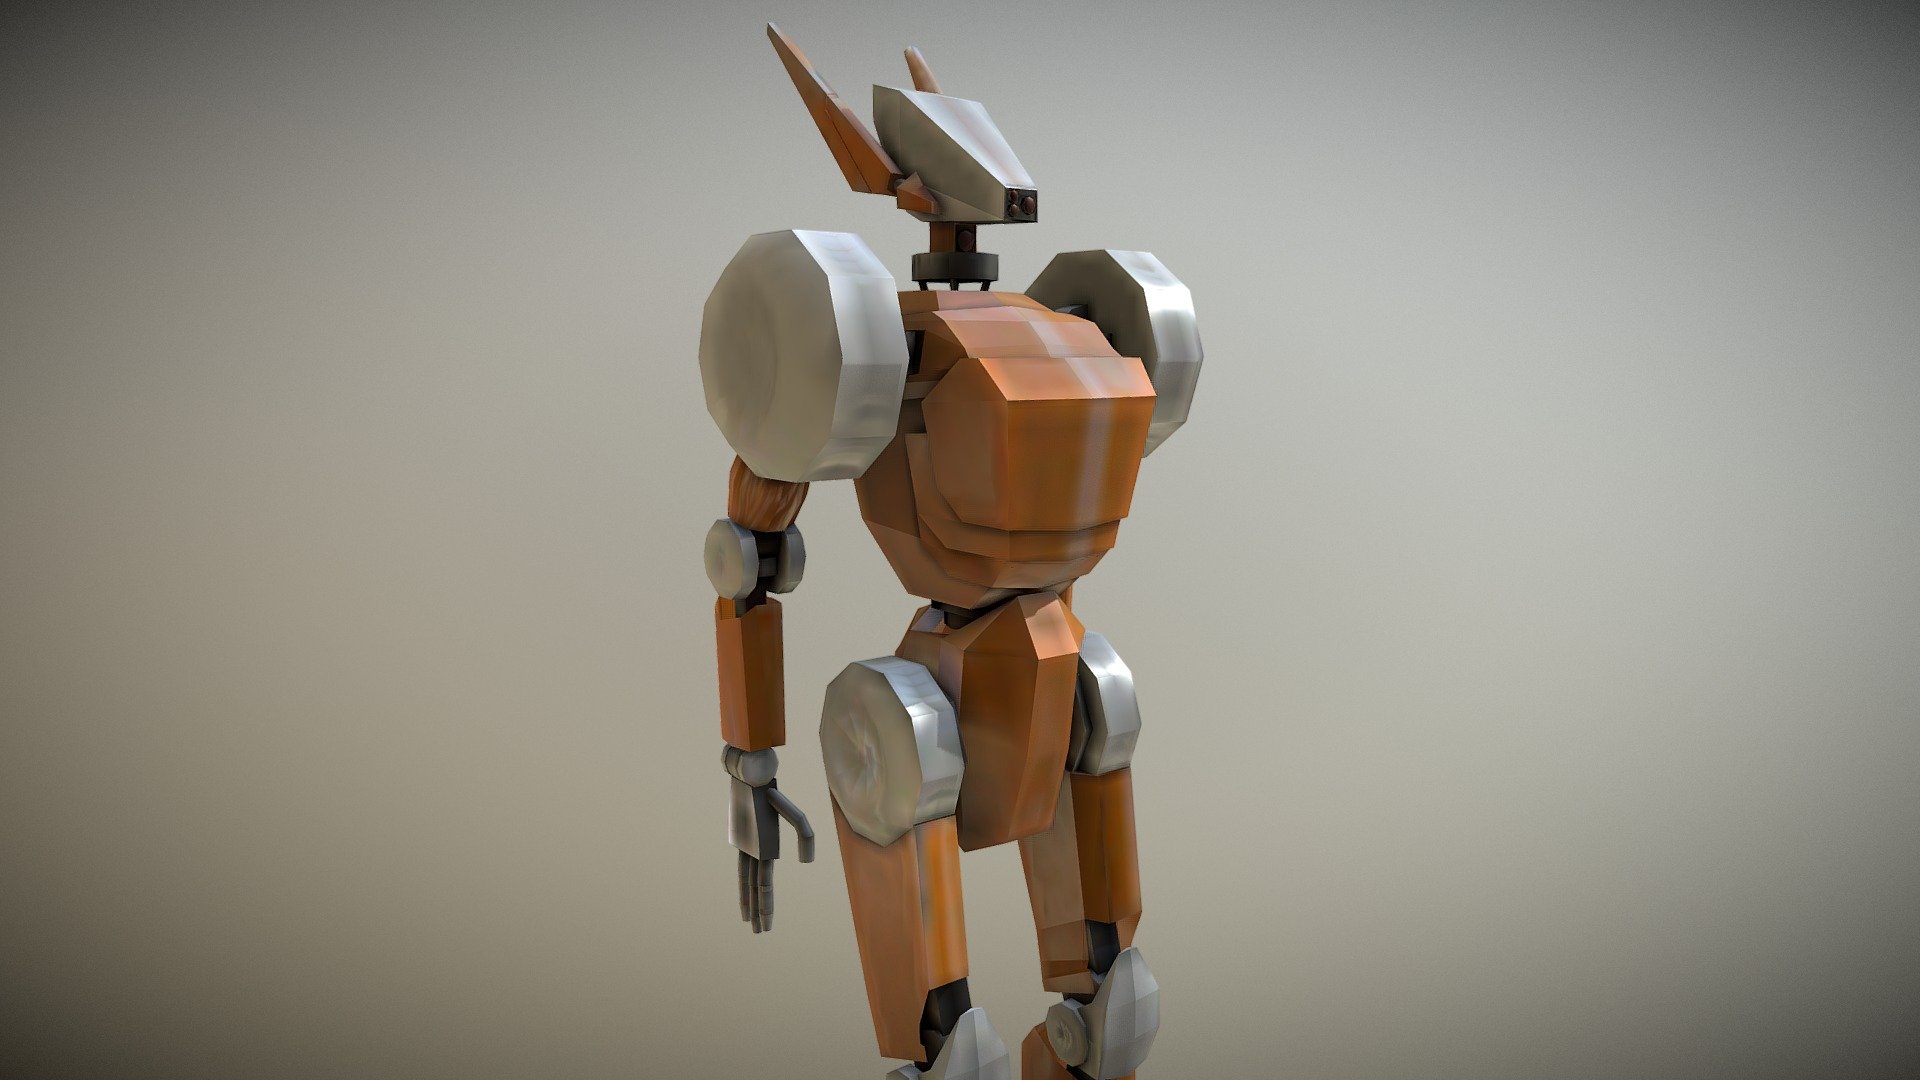 Low Poli model of a Mech, modeled with 3DS Max and painted with 3DCoat - Low Poli Robot 0.4 Painted - 3D model by JavierC 3d model